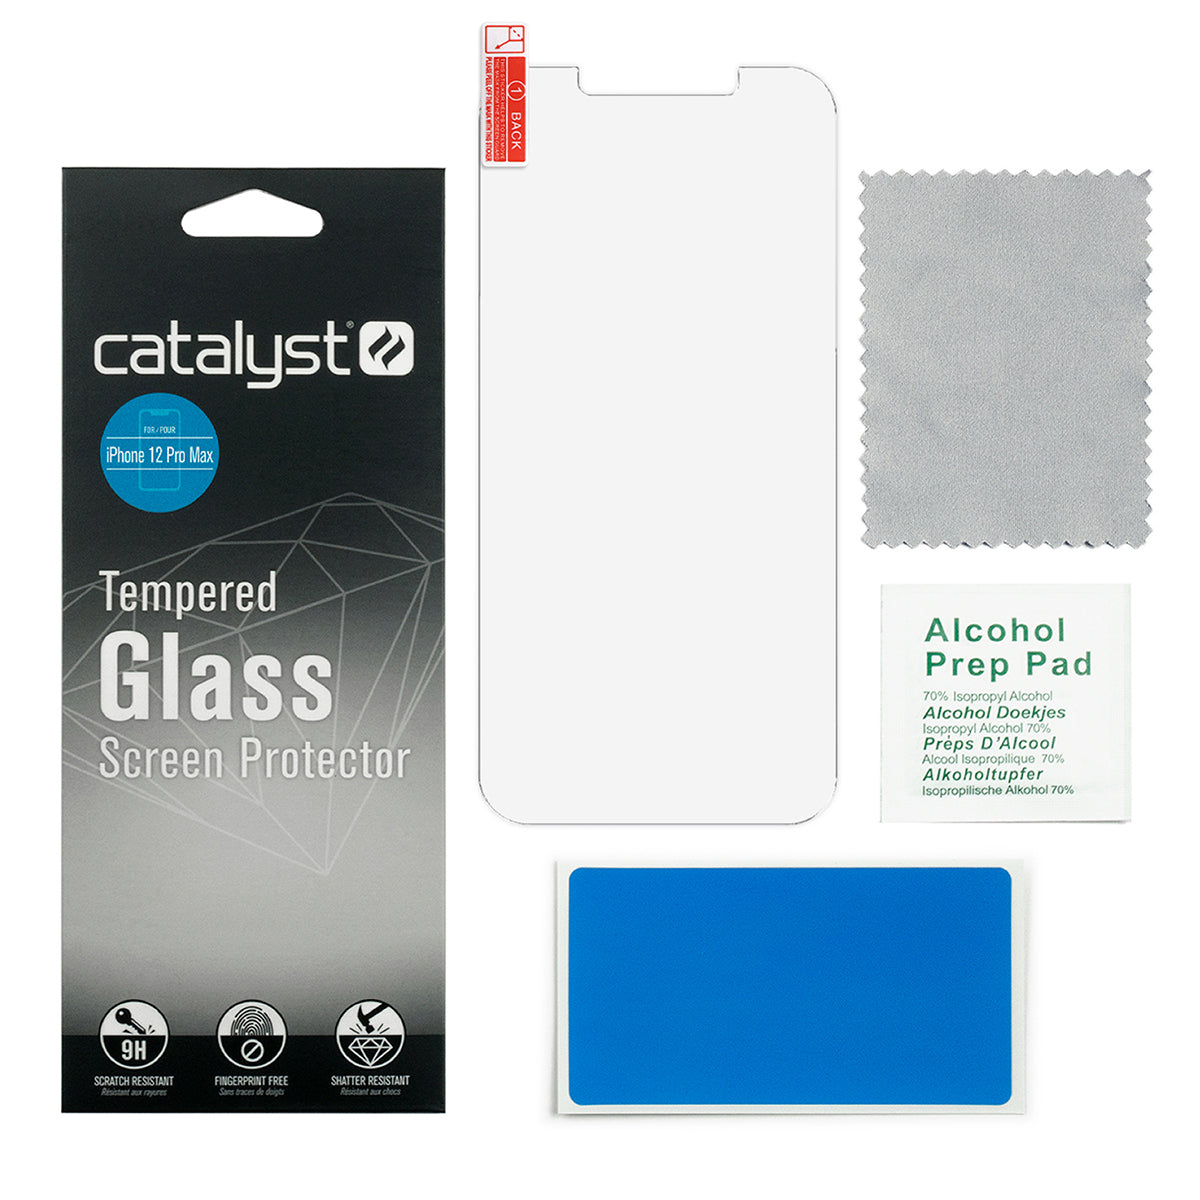 CATVIBE12BLUL|test-tempered-glass-screen-protector-for-iphone-12